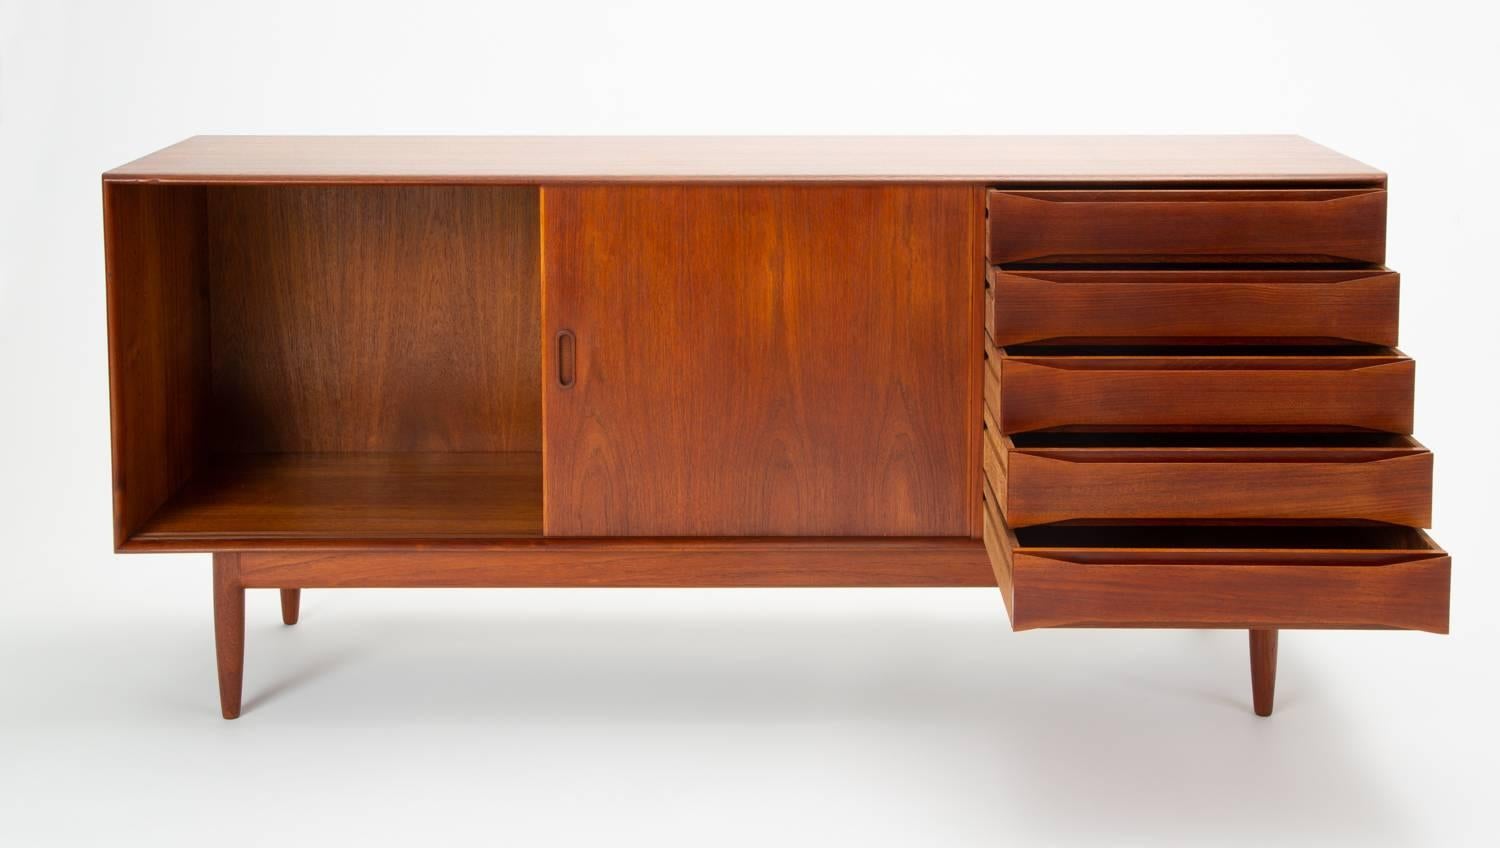 Danish Modern Teak Credenza with Bowtie Drawers by Johannes Aasbjerg 1